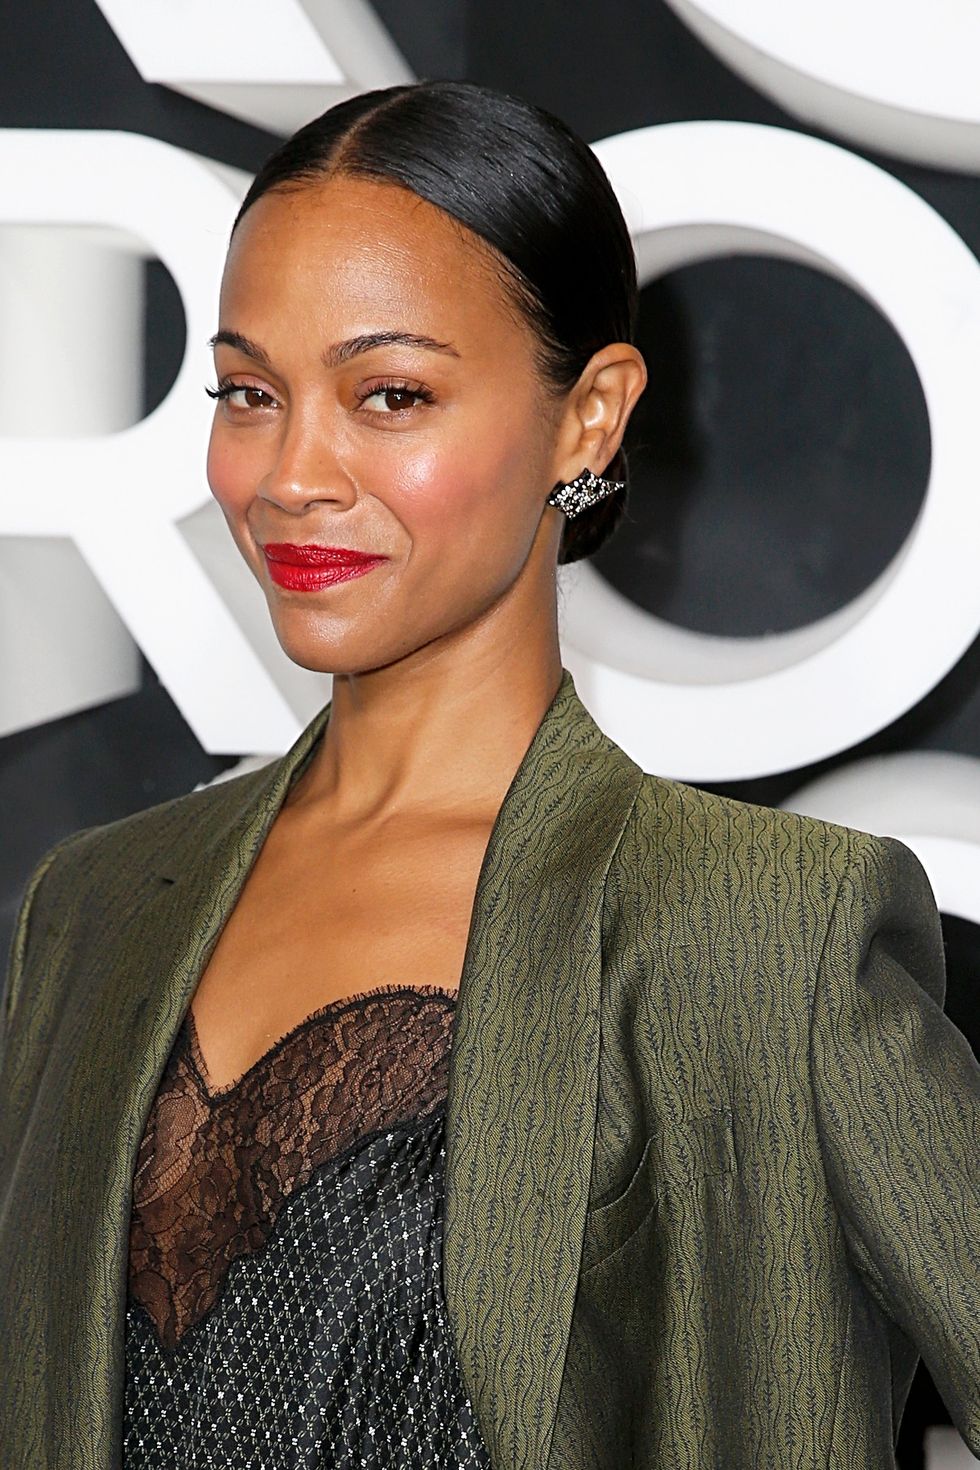 https://hips.hearstapps.com/hmg-prod/images/zoe-saldana-attends-the-nordstrom-nyc-flagship-opening-news-photo-1608067486.?crop=0.599xw:0.599xh;0.163xw,0.0125xh&resize=980:*